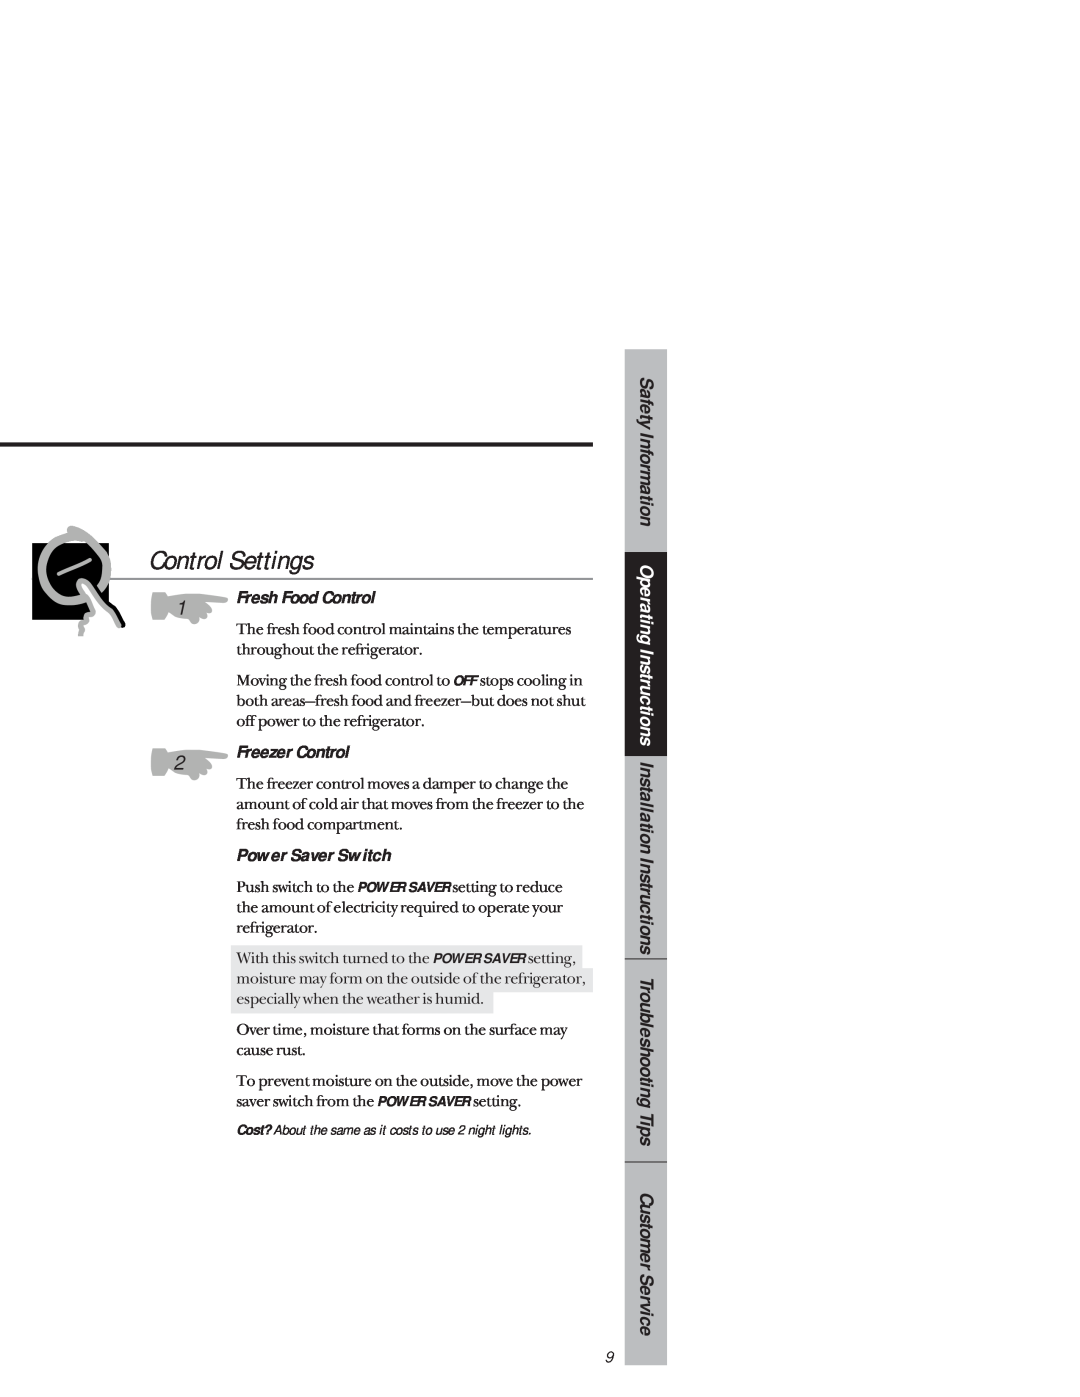 GE 1825 owner manual Control Settings, Power Saver Switch 